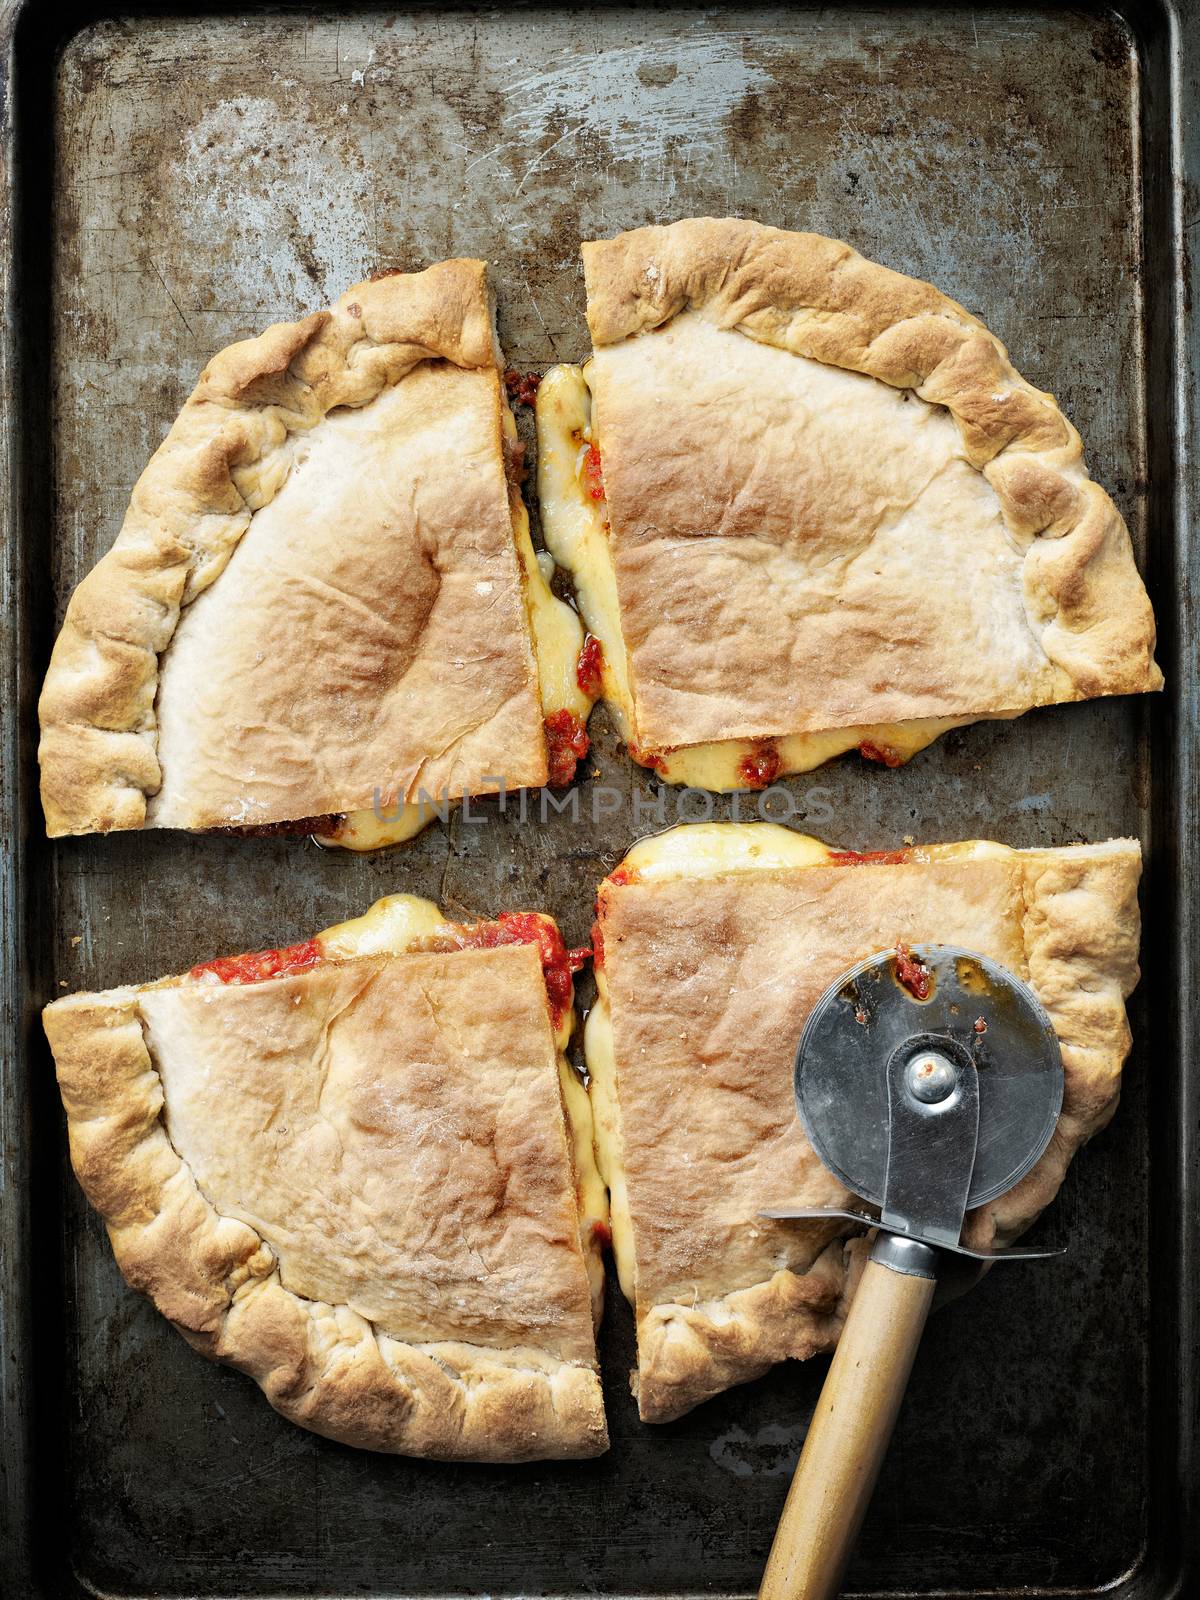 rustic italian calzone stuffed pizza by zkruger